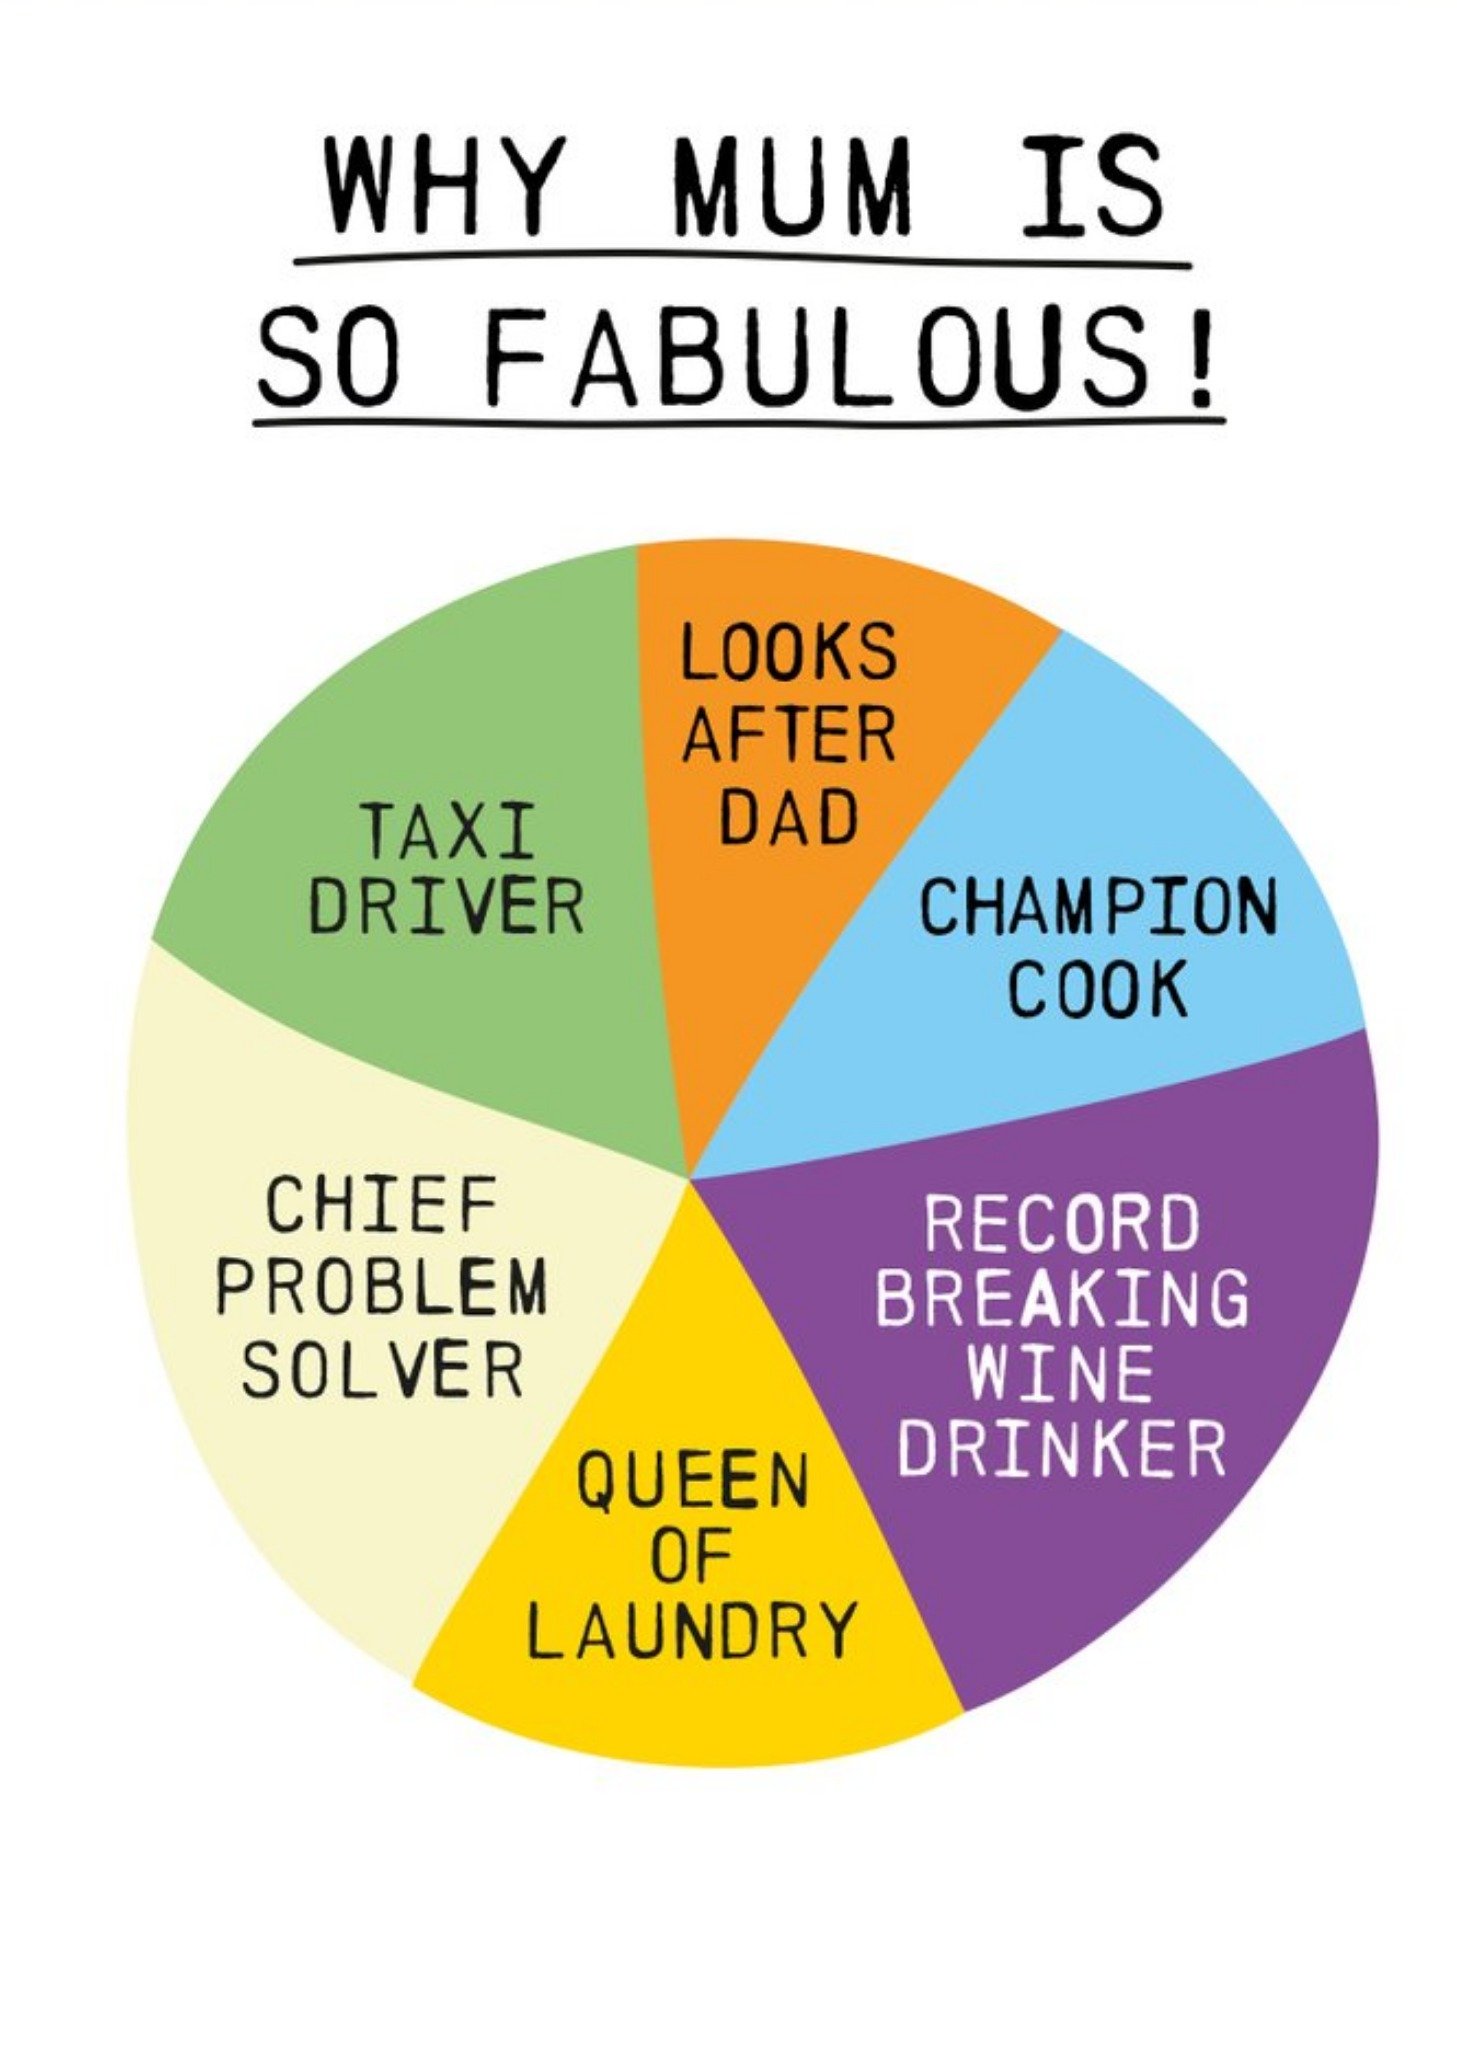 Moonpig Illustration Of A Colourful Pie Chart Humorous Why Mum Is Fabulous Card, Large